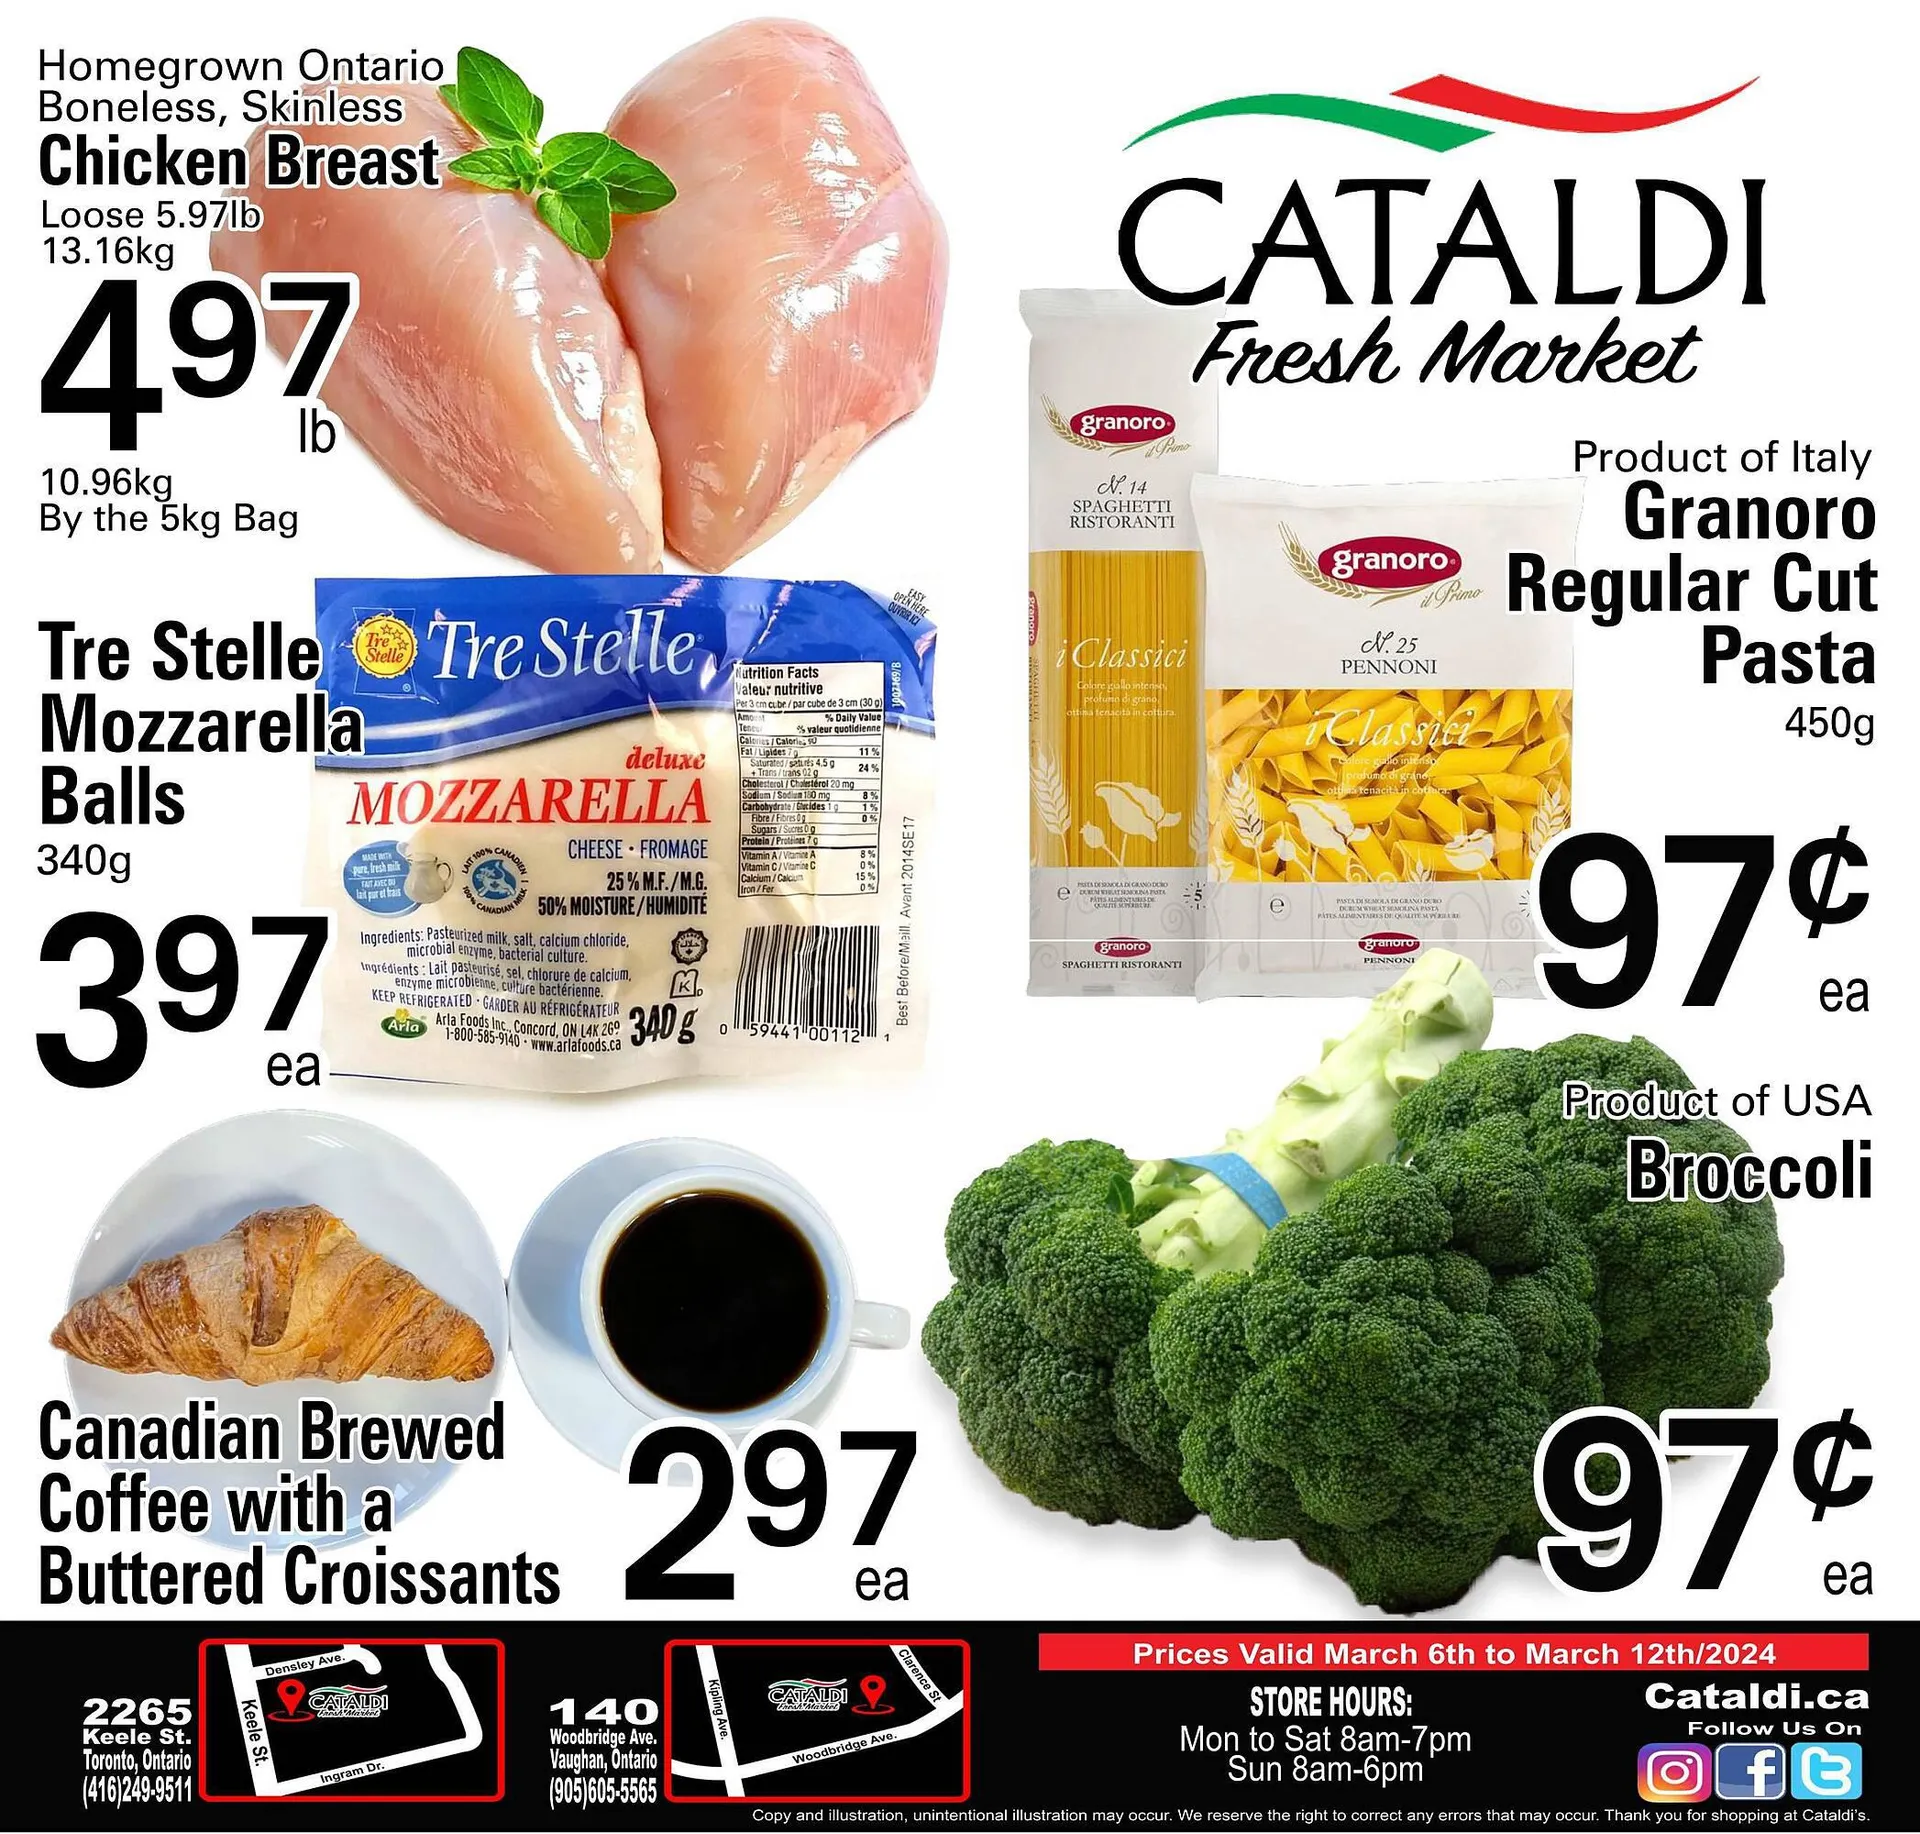 Cataldi Fresh Market flyer from March 6 to March 12 2024 - flyer page 1